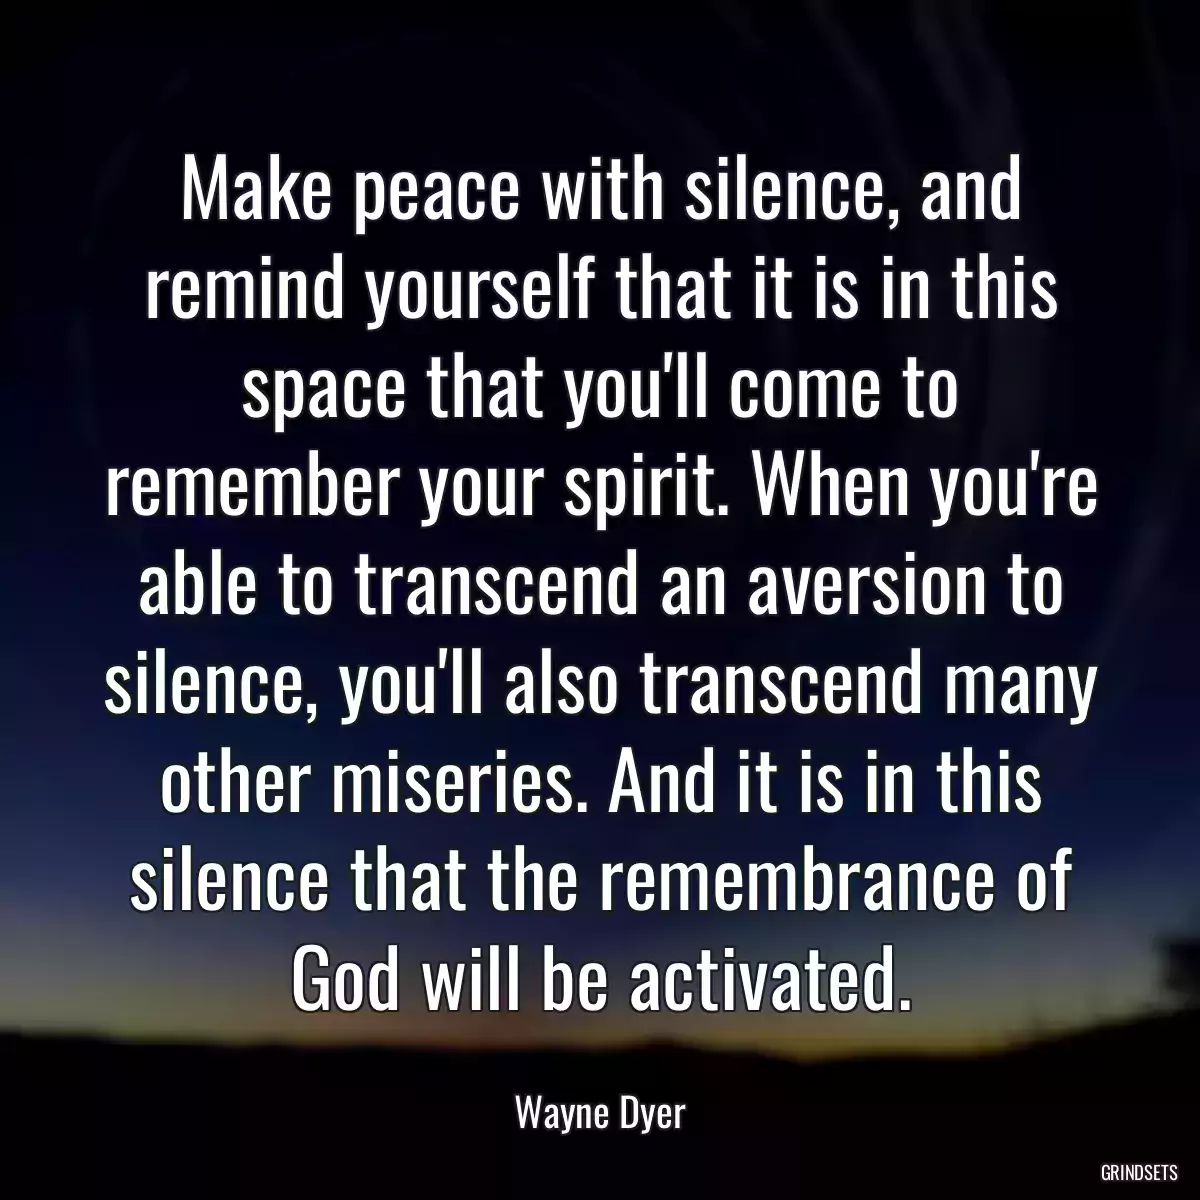 Make peace with silence, and remind yourself that it is in this space that you\'ll come to remember your spirit. When you\'re able to transcend an aversion to silence, you\'ll also transcend many other miseries. And it is in this silence that the remembrance of God will be activated.